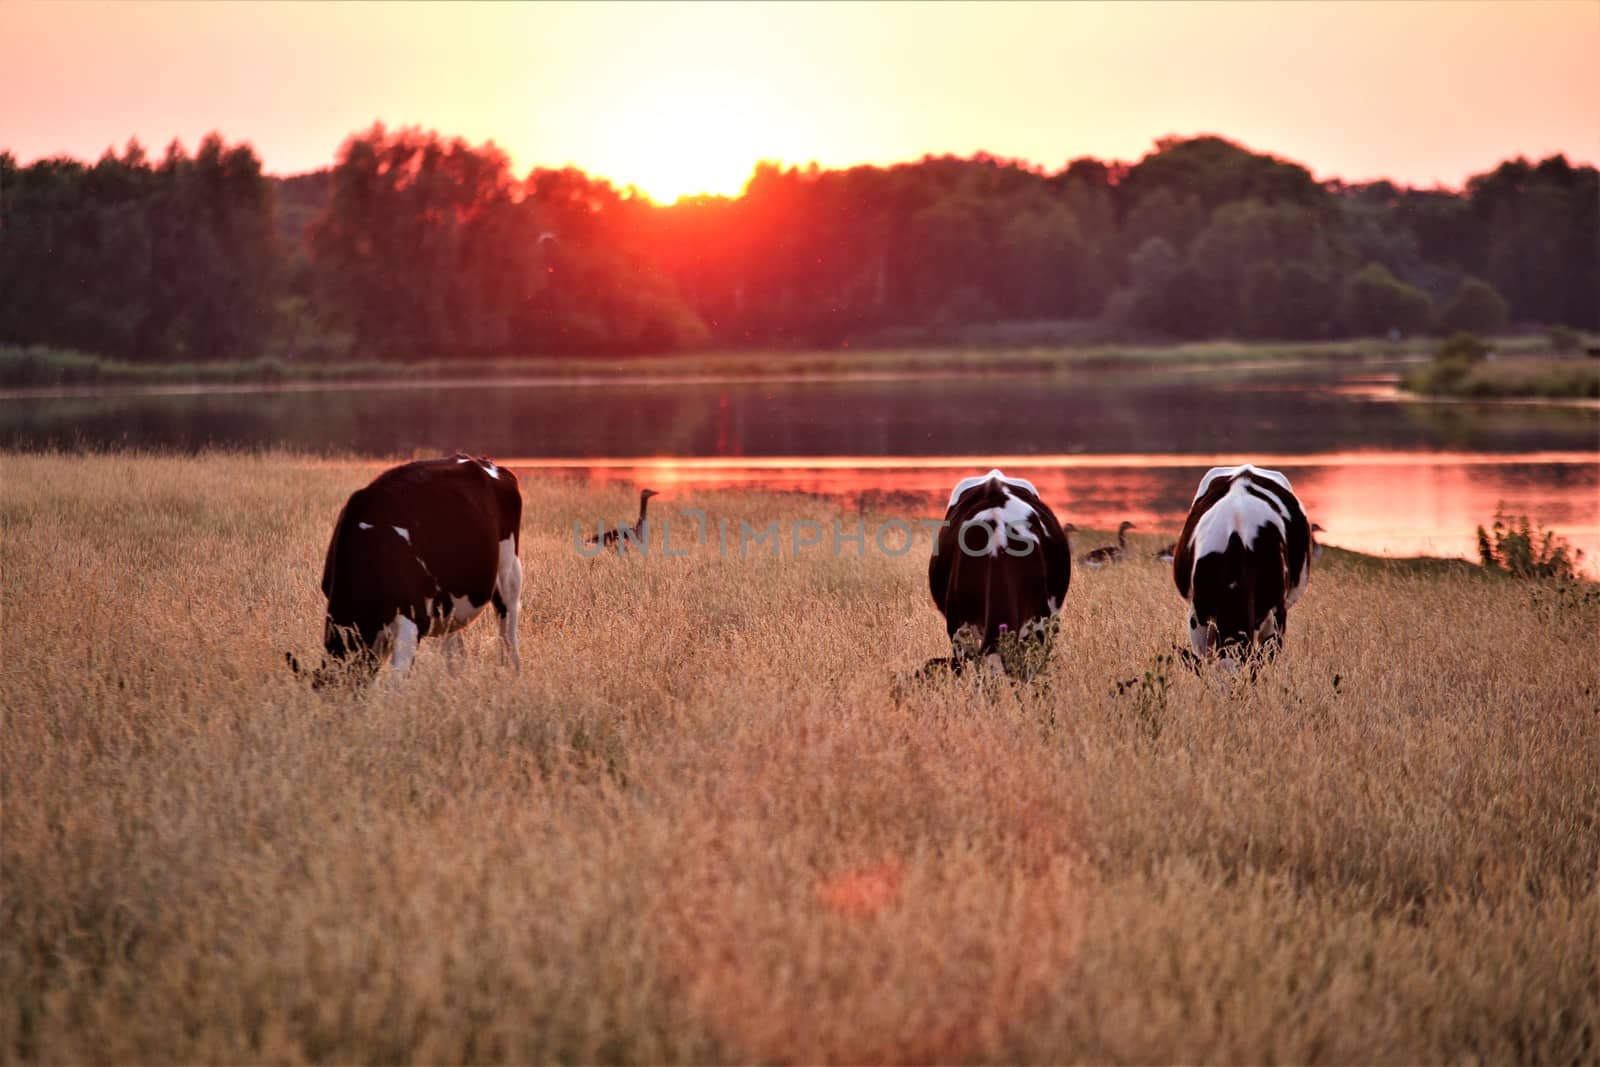 A great sunset with a lake view ,cows in the foreground and bushes and trees in the background